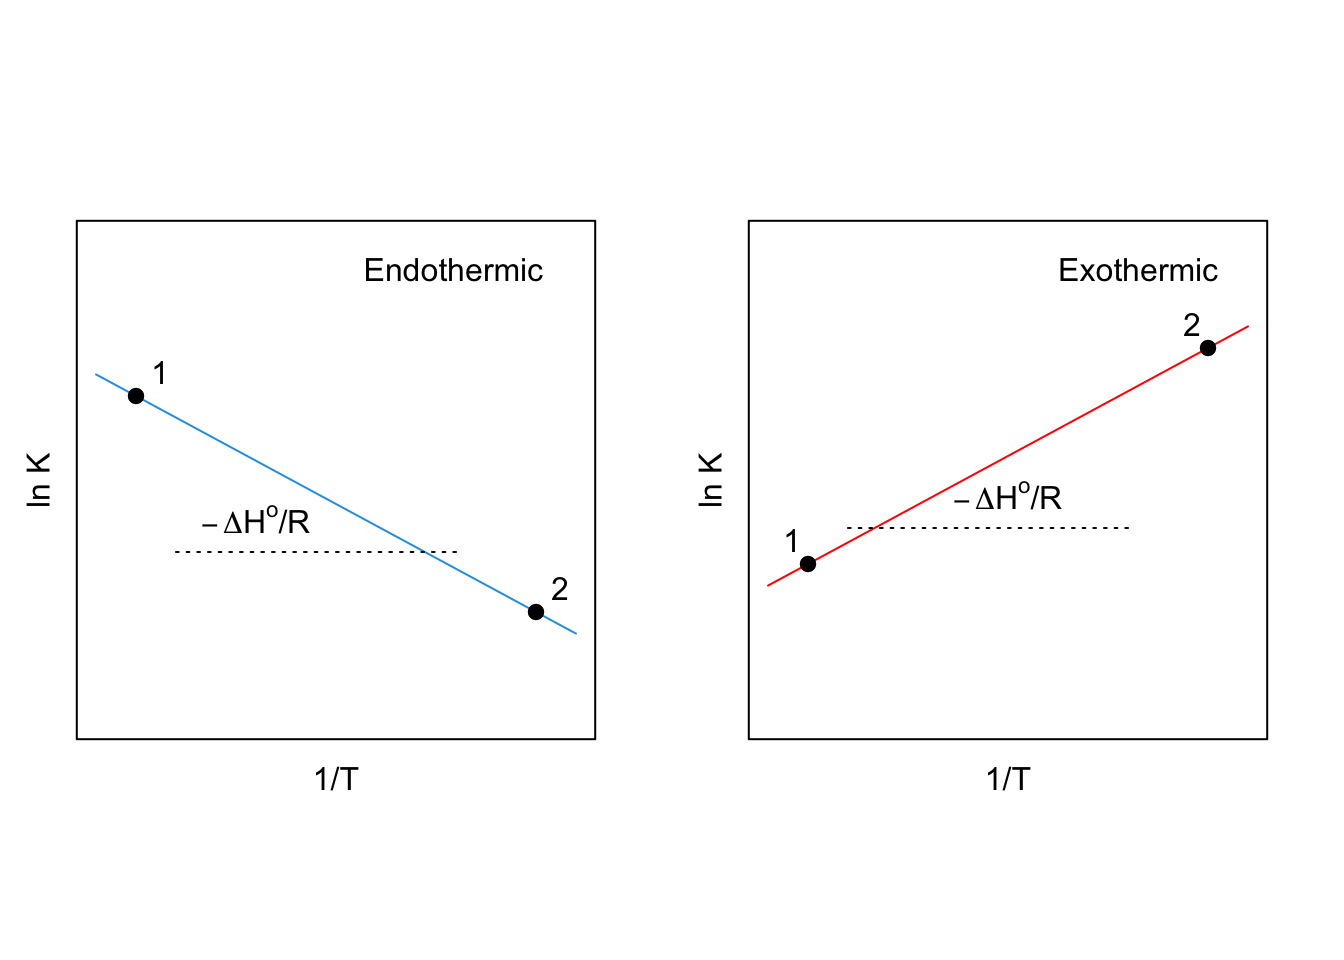 Van 't Hoff Plots for an Endothermic (Left, Blue) and an Exothermic (Right, Red) Reactions at Constant P.